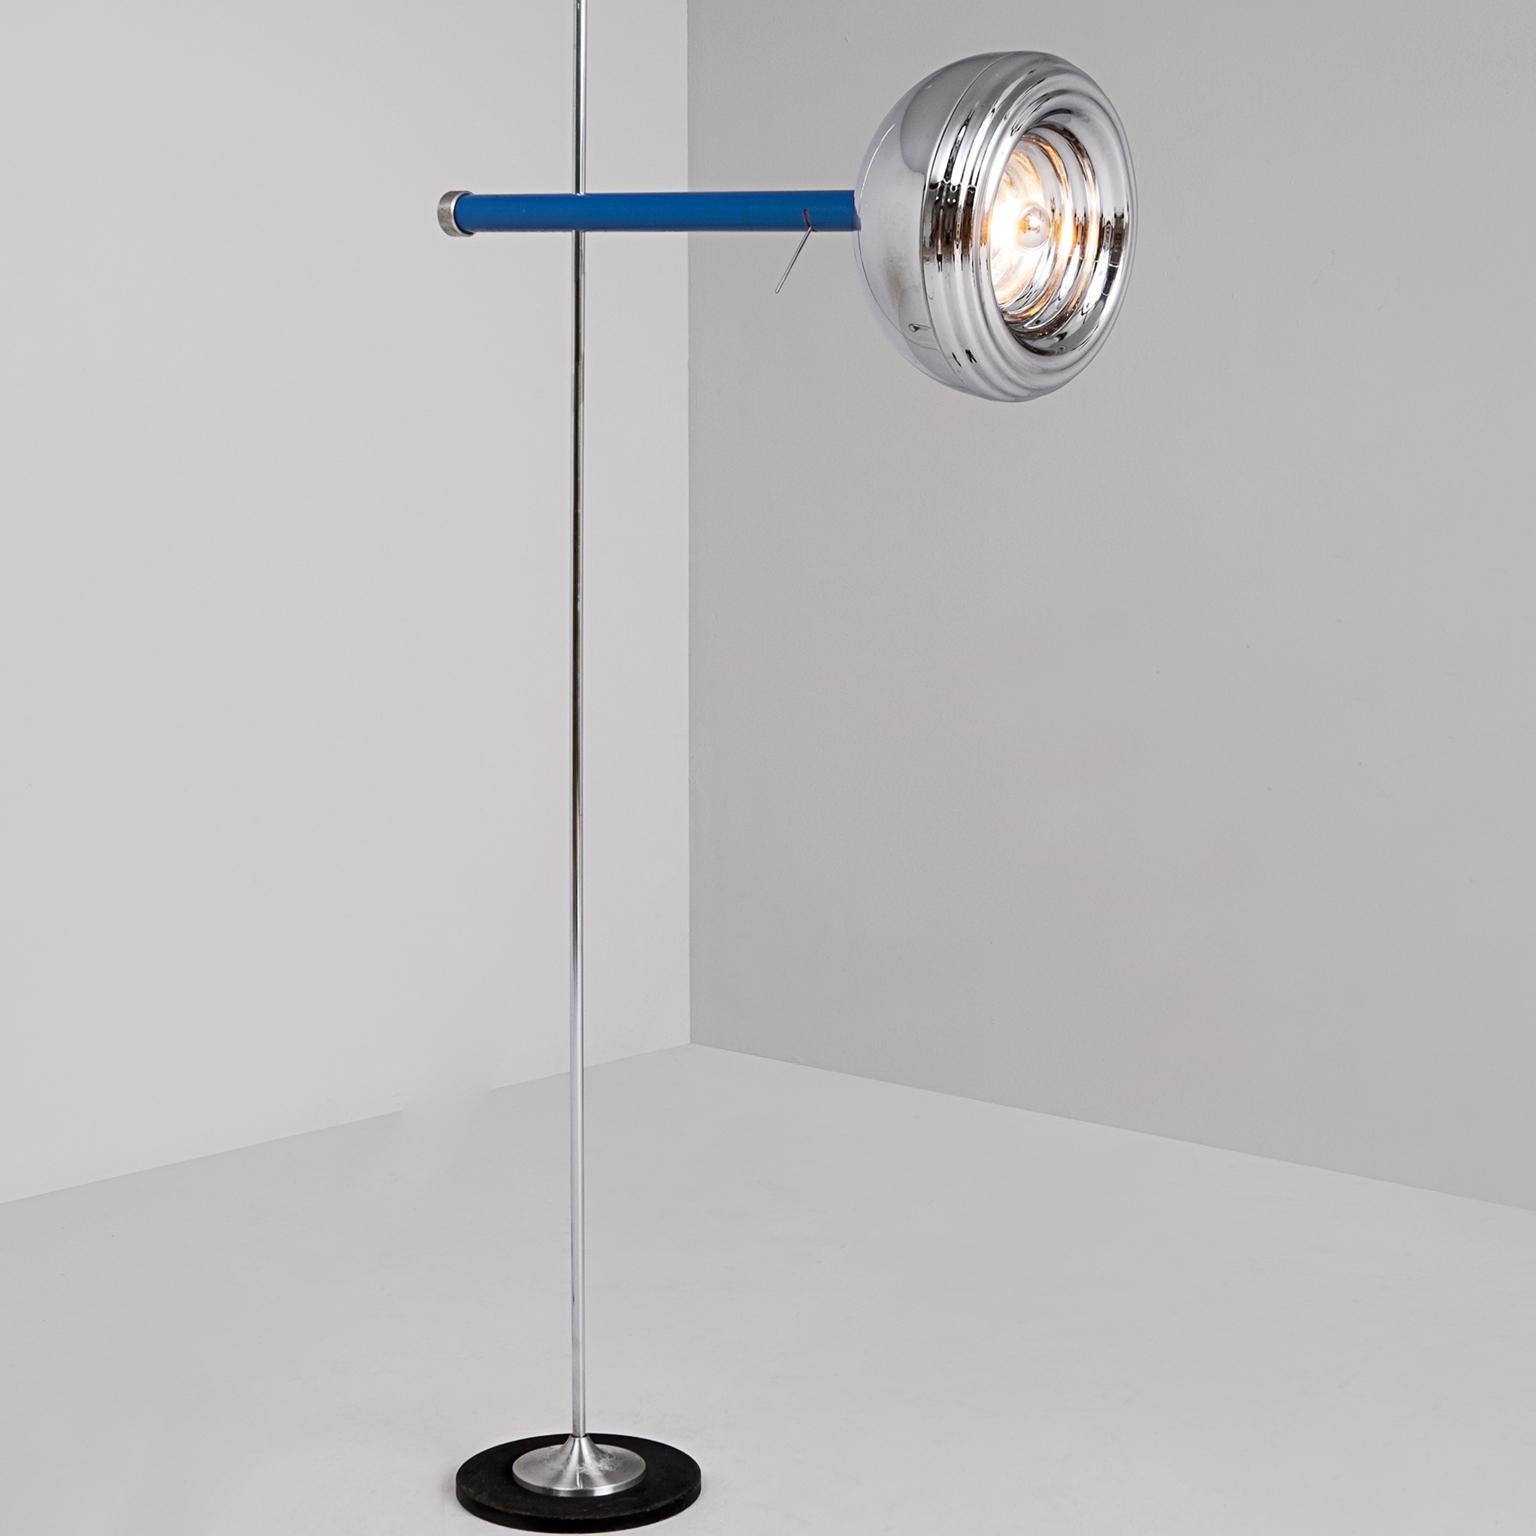 Adjustable floor lamp, in chromed metal, Italy, 1980s.

The well made lamp has a plain base with a chrome vertical stem and an interesting chrome shade. The shade is attached to the vertical base with a horizontal clear blue tube. The corded nut